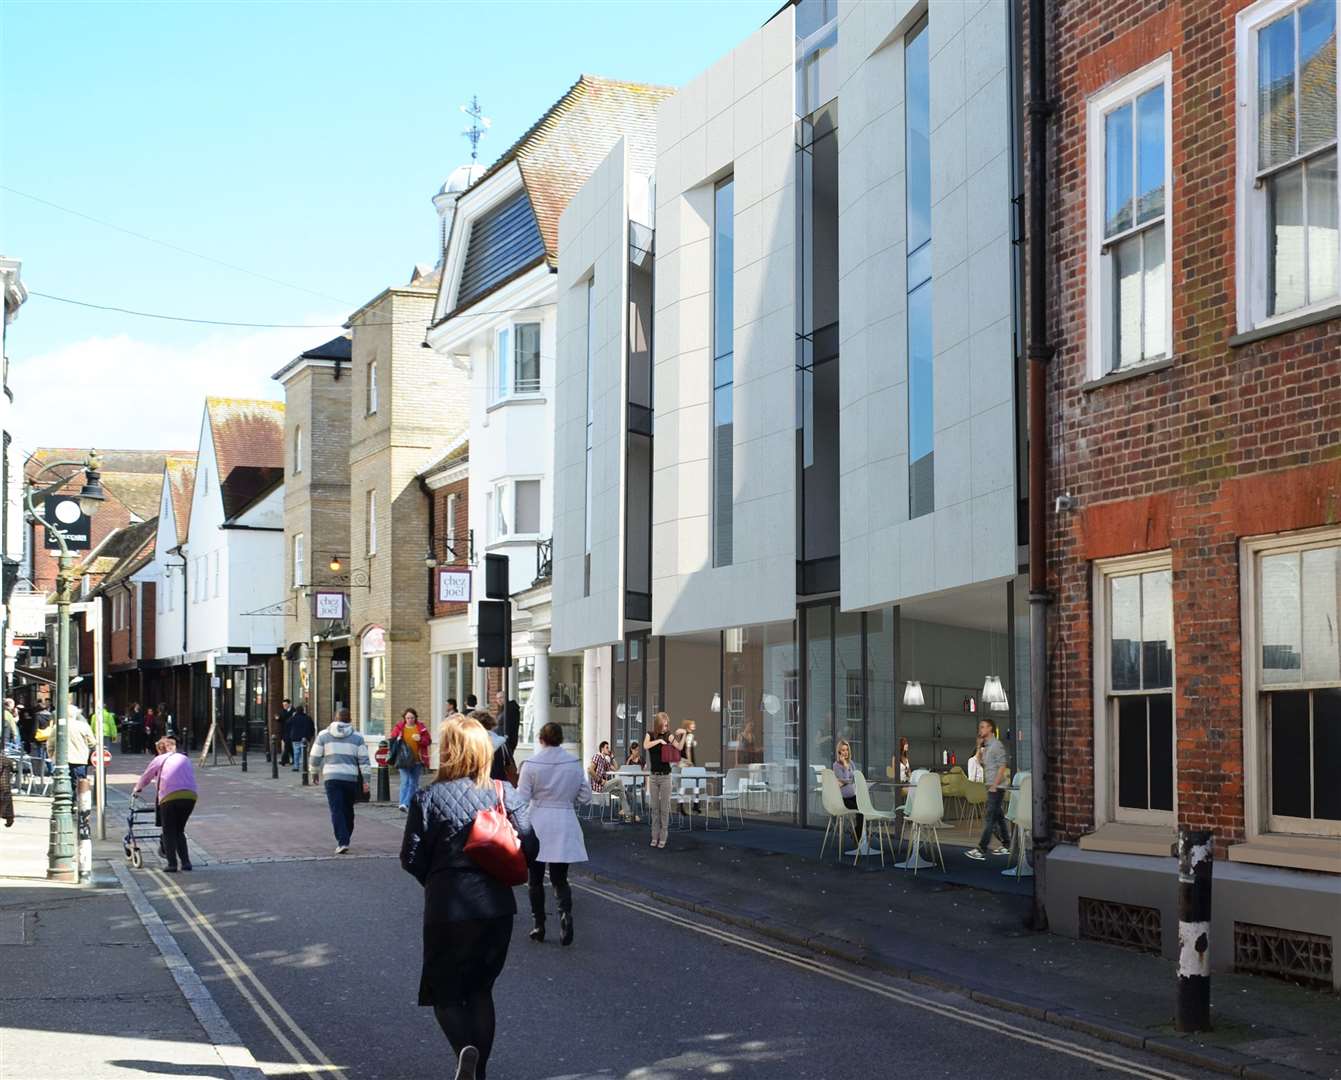 A CGI image released during the planning process showed tables and chairs on the street outside the proposed shops or restaurants. Picture: Guy Hollaway Architects